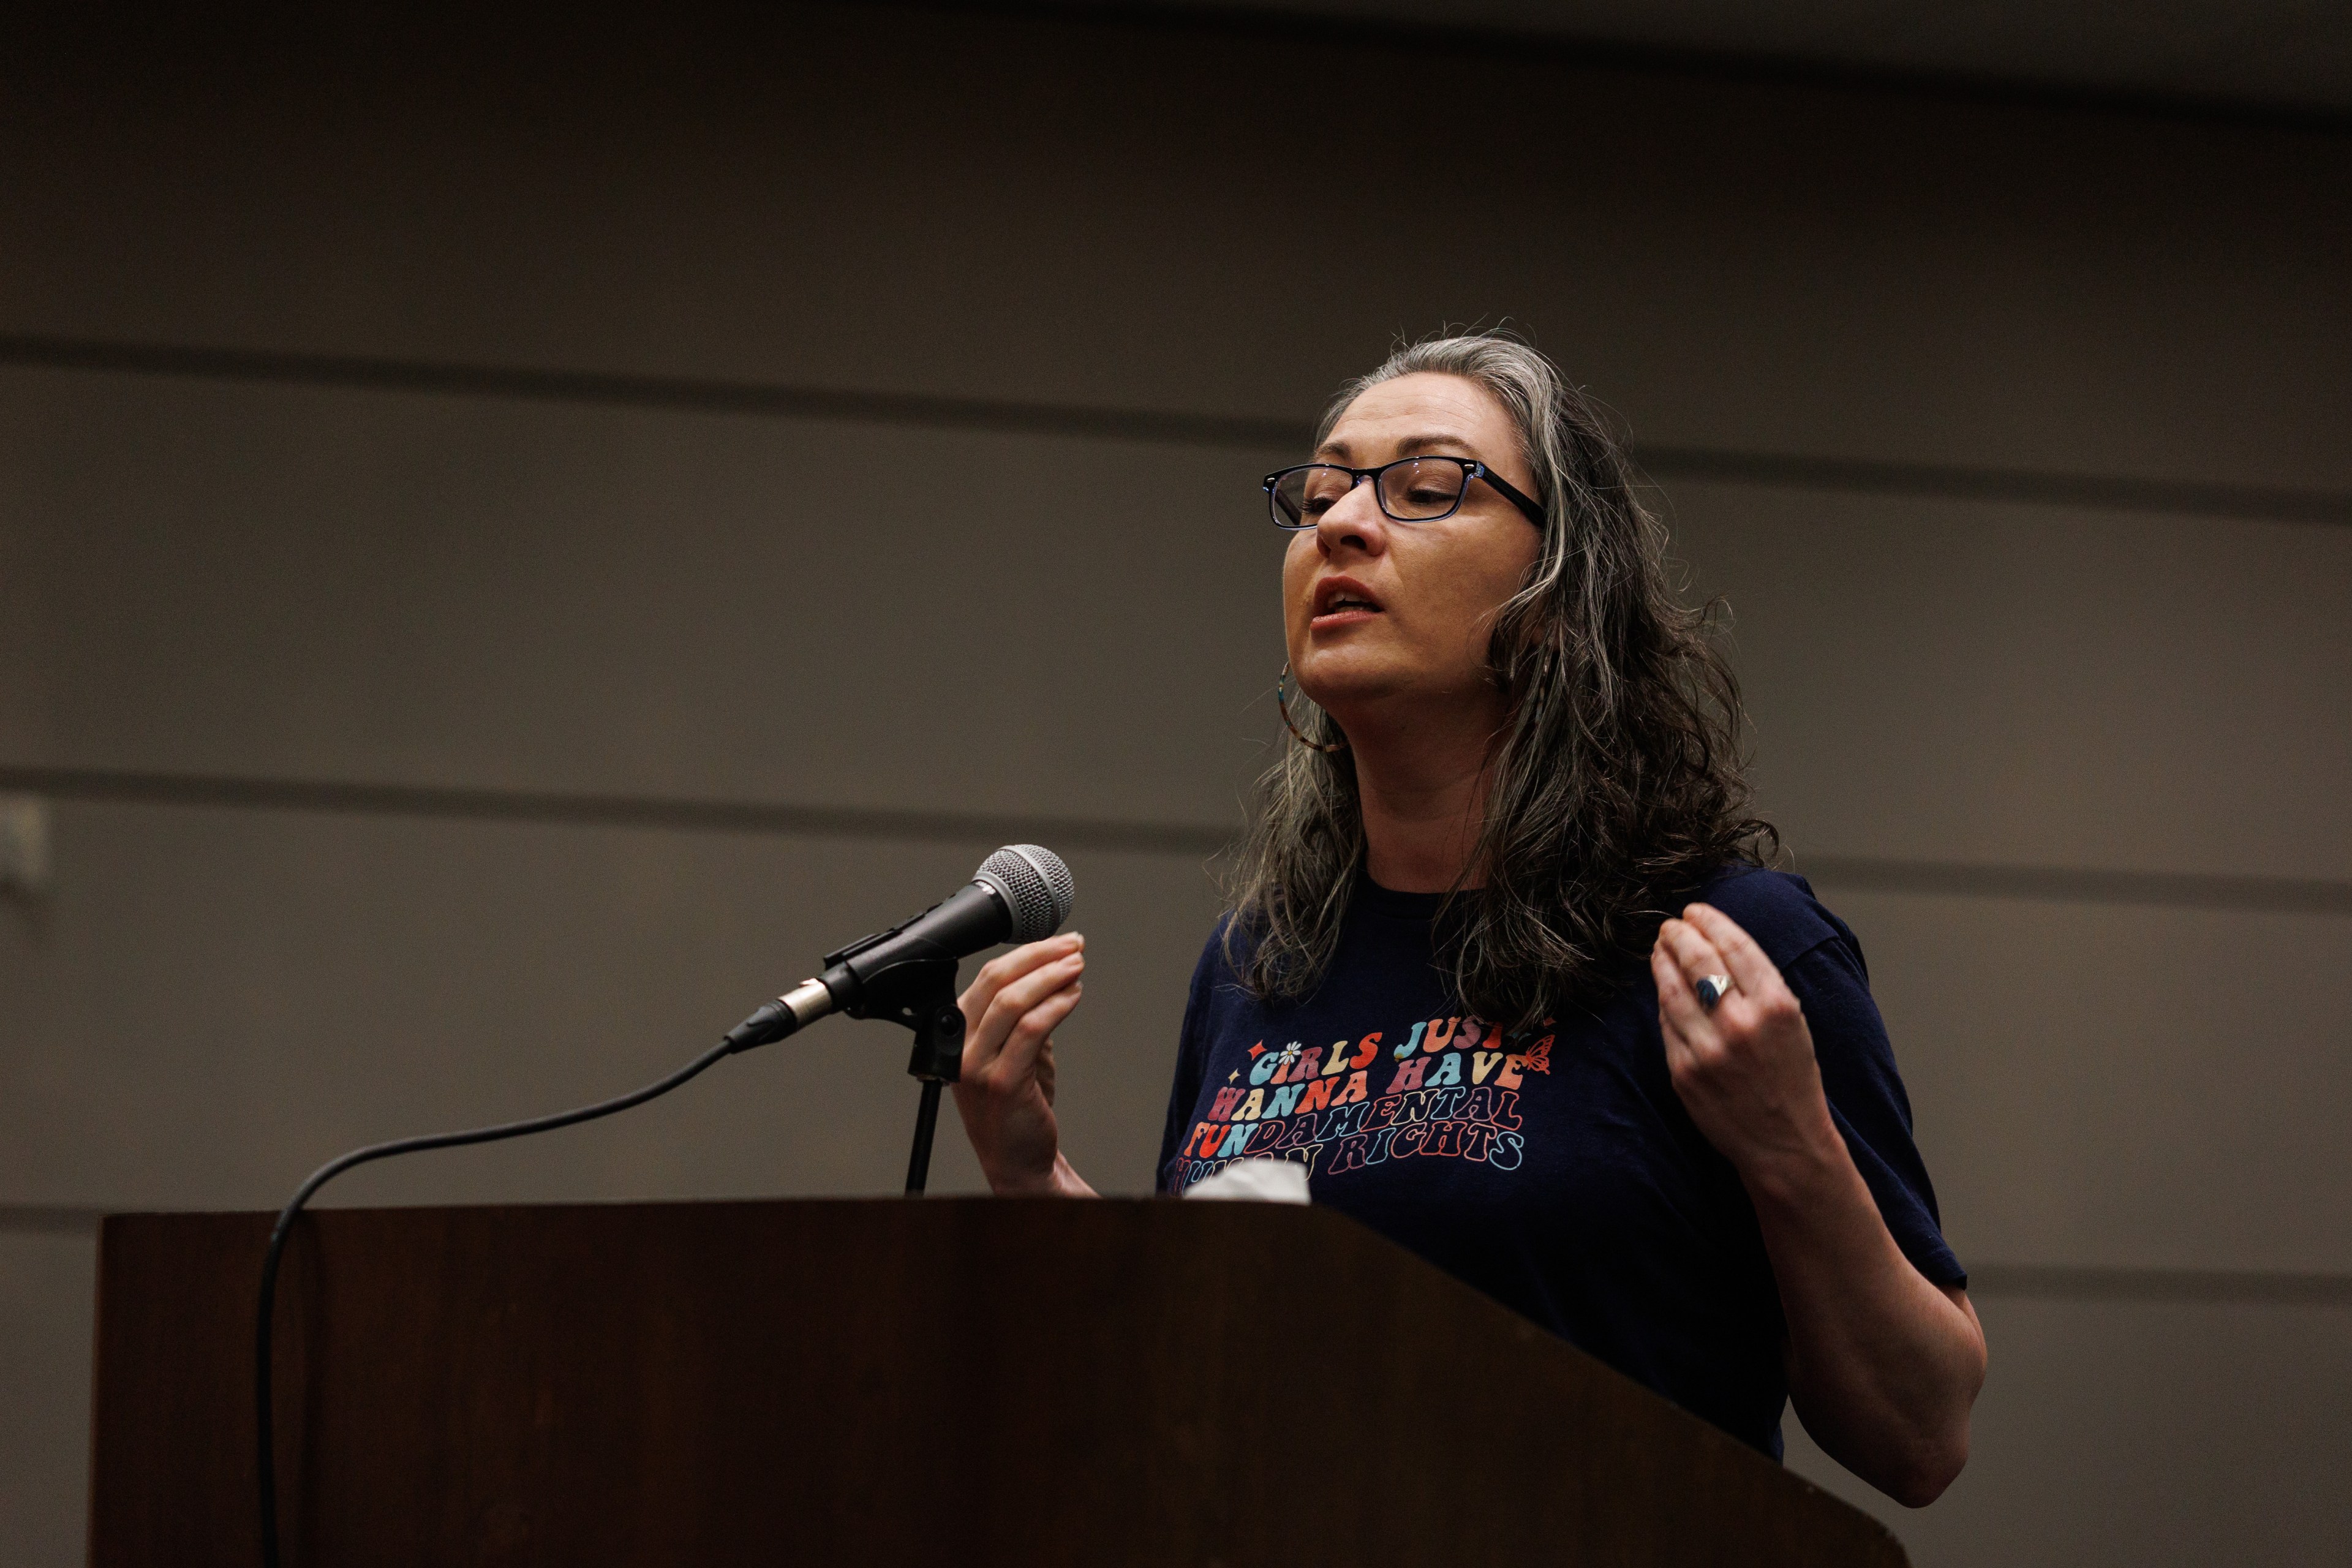 A woman with glasses is speaking into a microphone at a podium, gesturing with her hands.